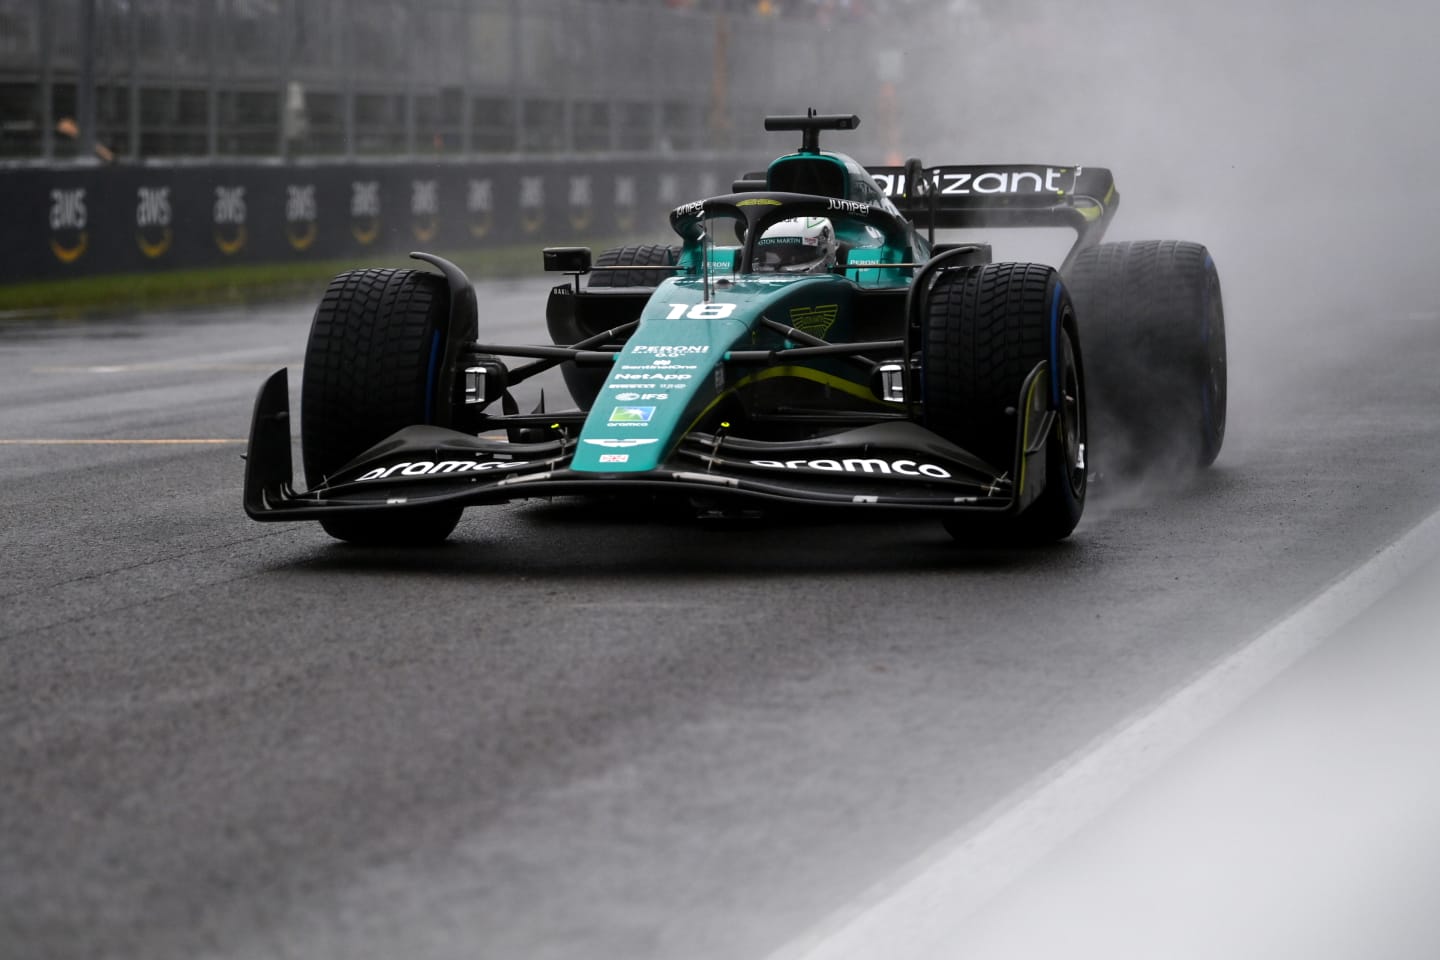 MONTREAL, QUEBEC - JUNE 18: Lance Stroll of Canada driving the (18) Aston Martin AMR22 Mercedes in the wet during qualifying ahead of the F1 Grand Prix of Canada at Circuit Gilles Villeneuve on June 18, 2022 in Montreal, Quebec. (Photo by Dan Mullan/Getty Images)